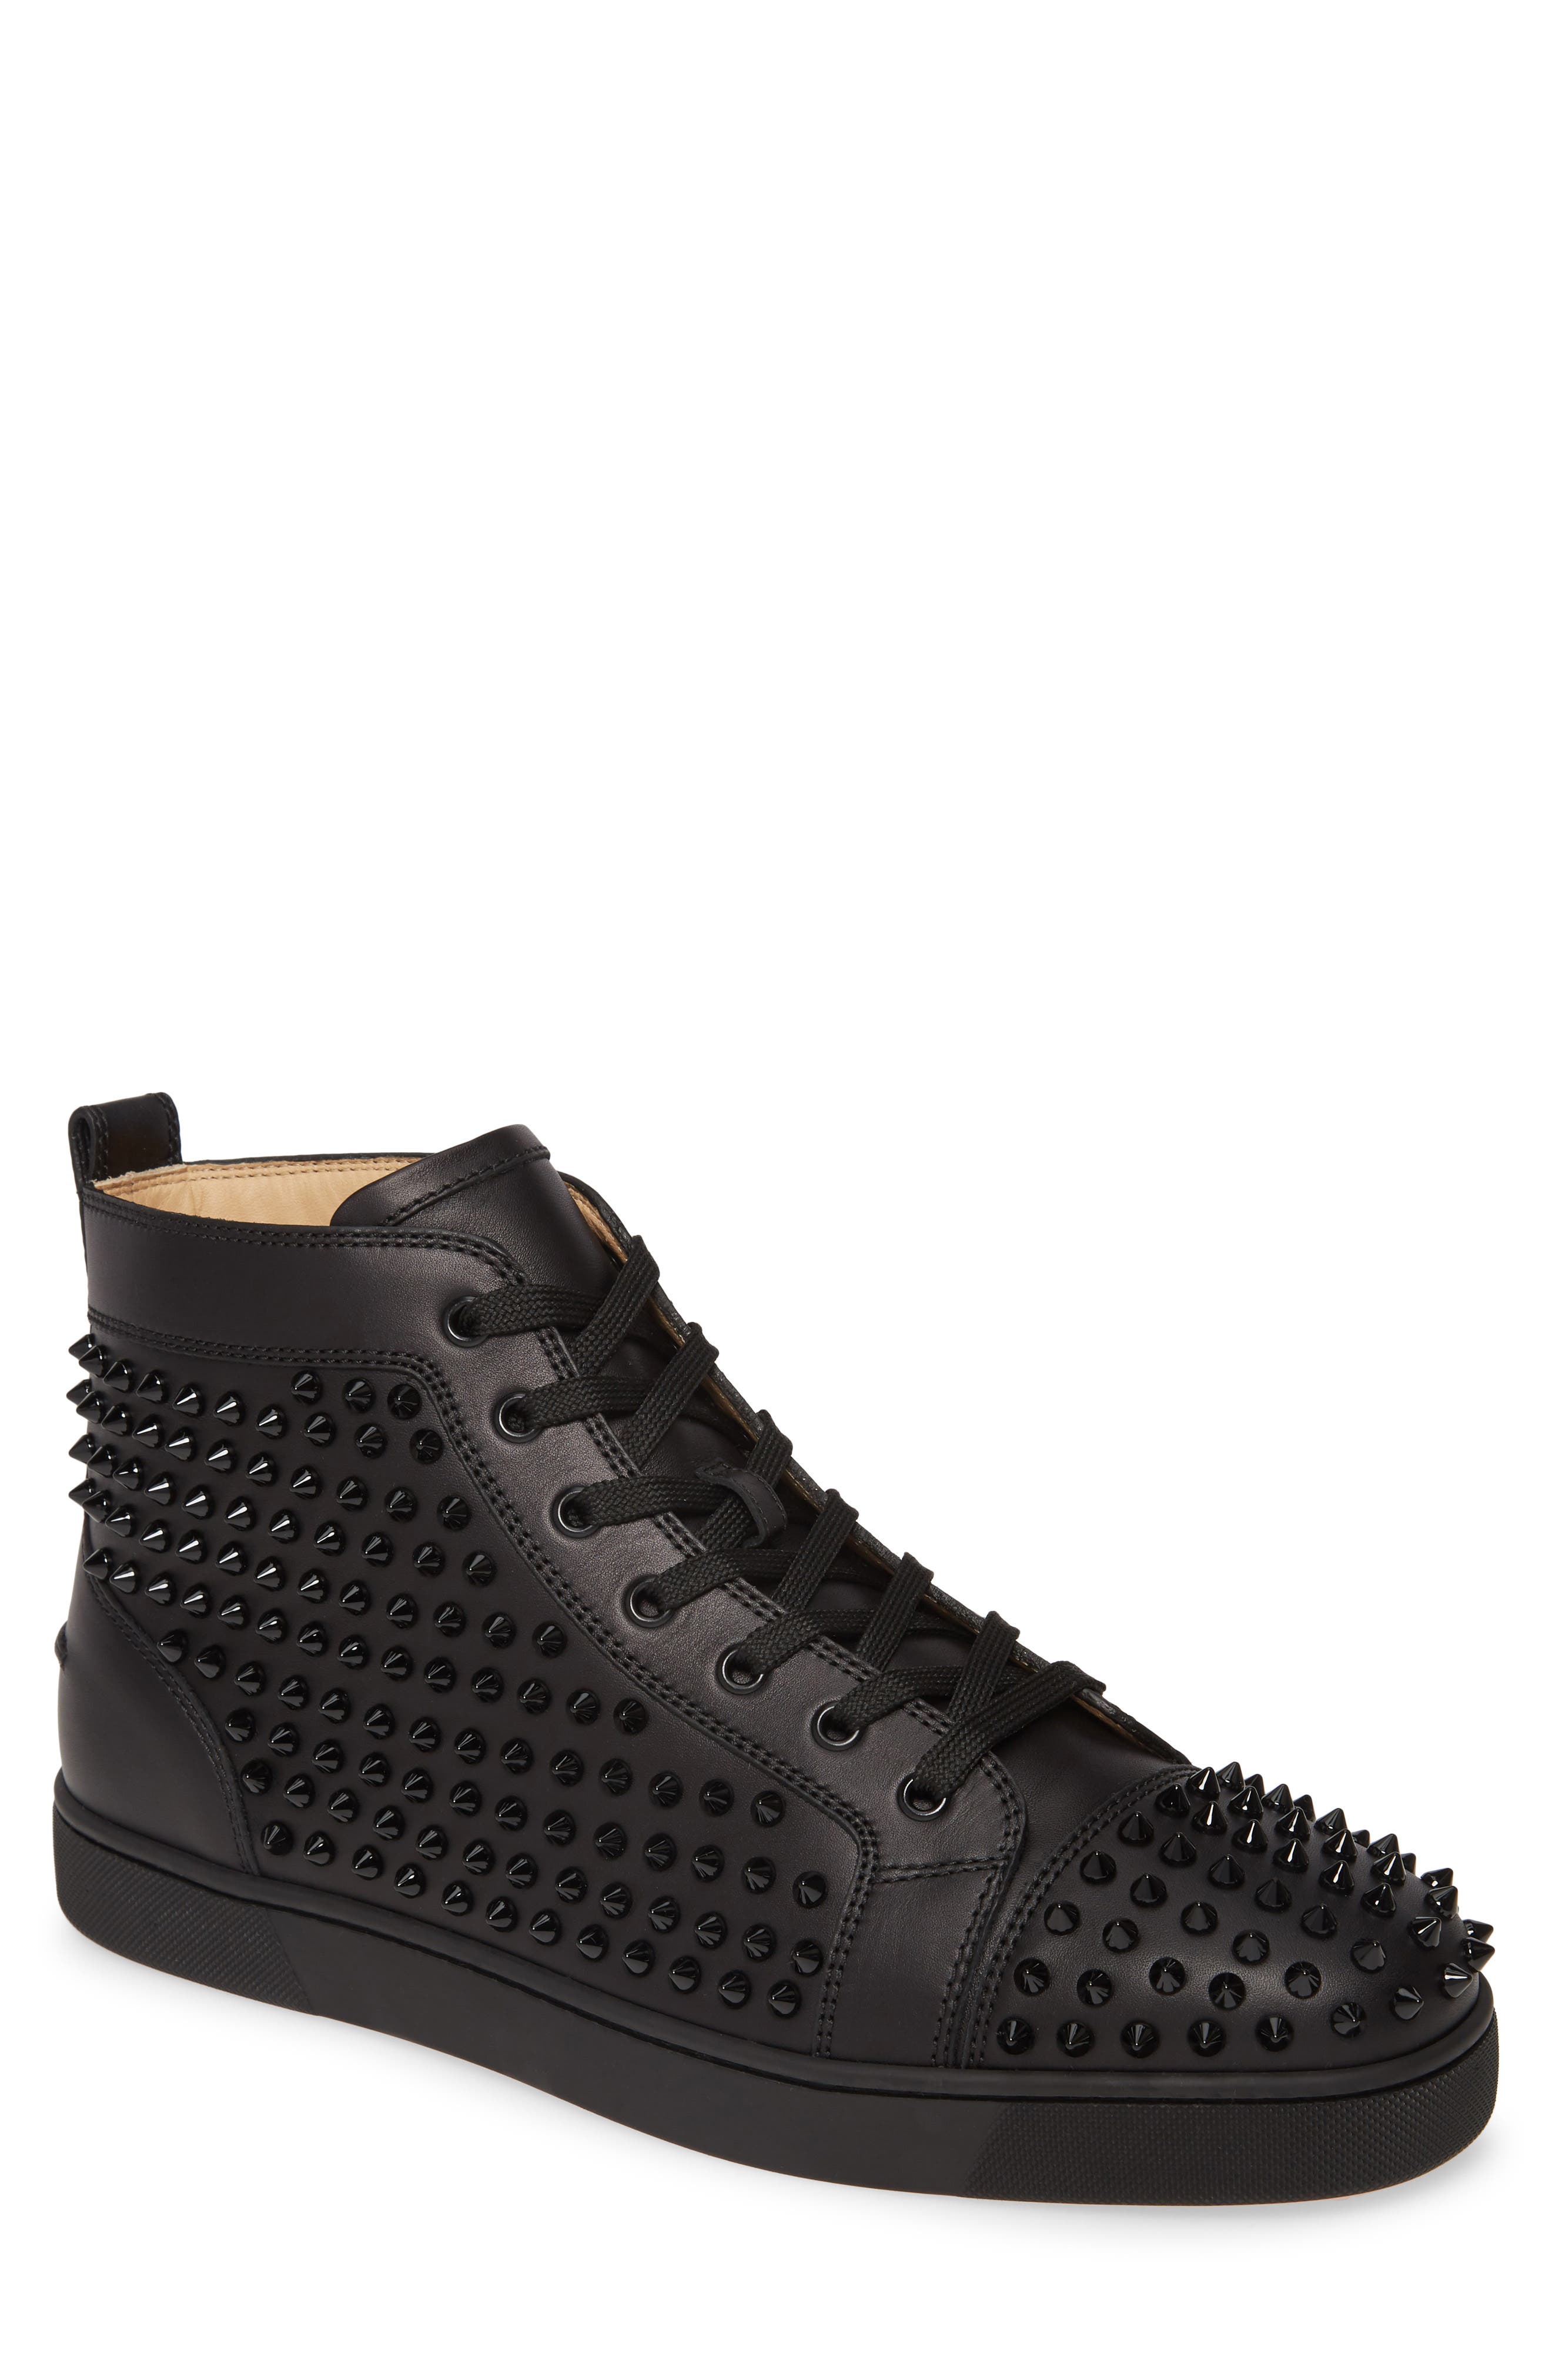 christian louboutin sneakers nordstrom